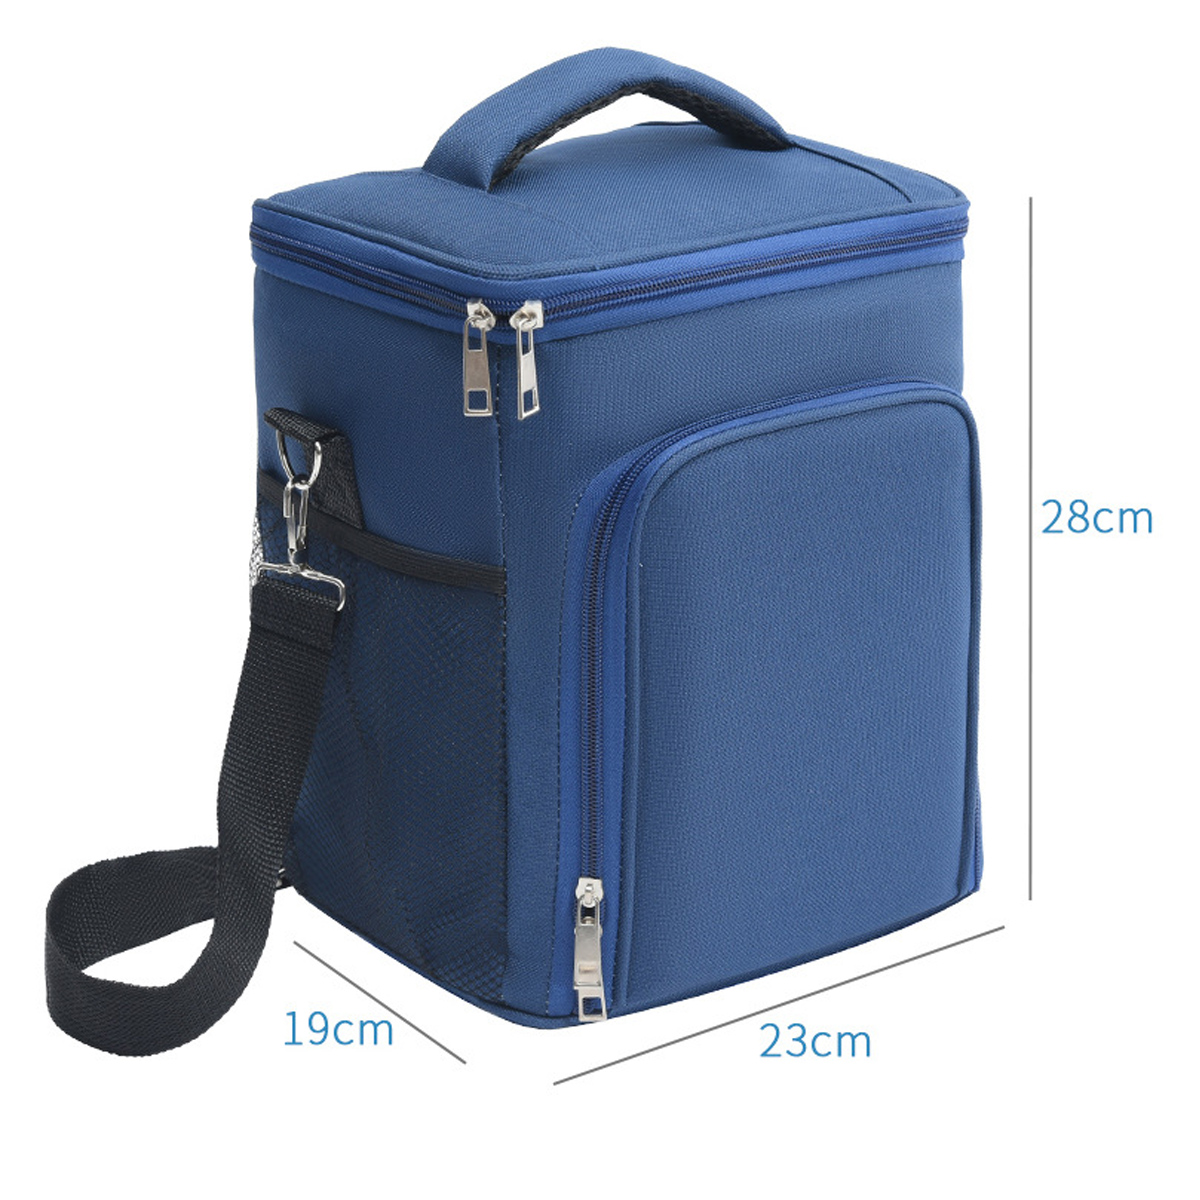 14L-Insulated-Picnic-Bag-Carry-Lunch-Bag-Thermal-Handbag-Outdoor-Camping-Travel-1872425-2